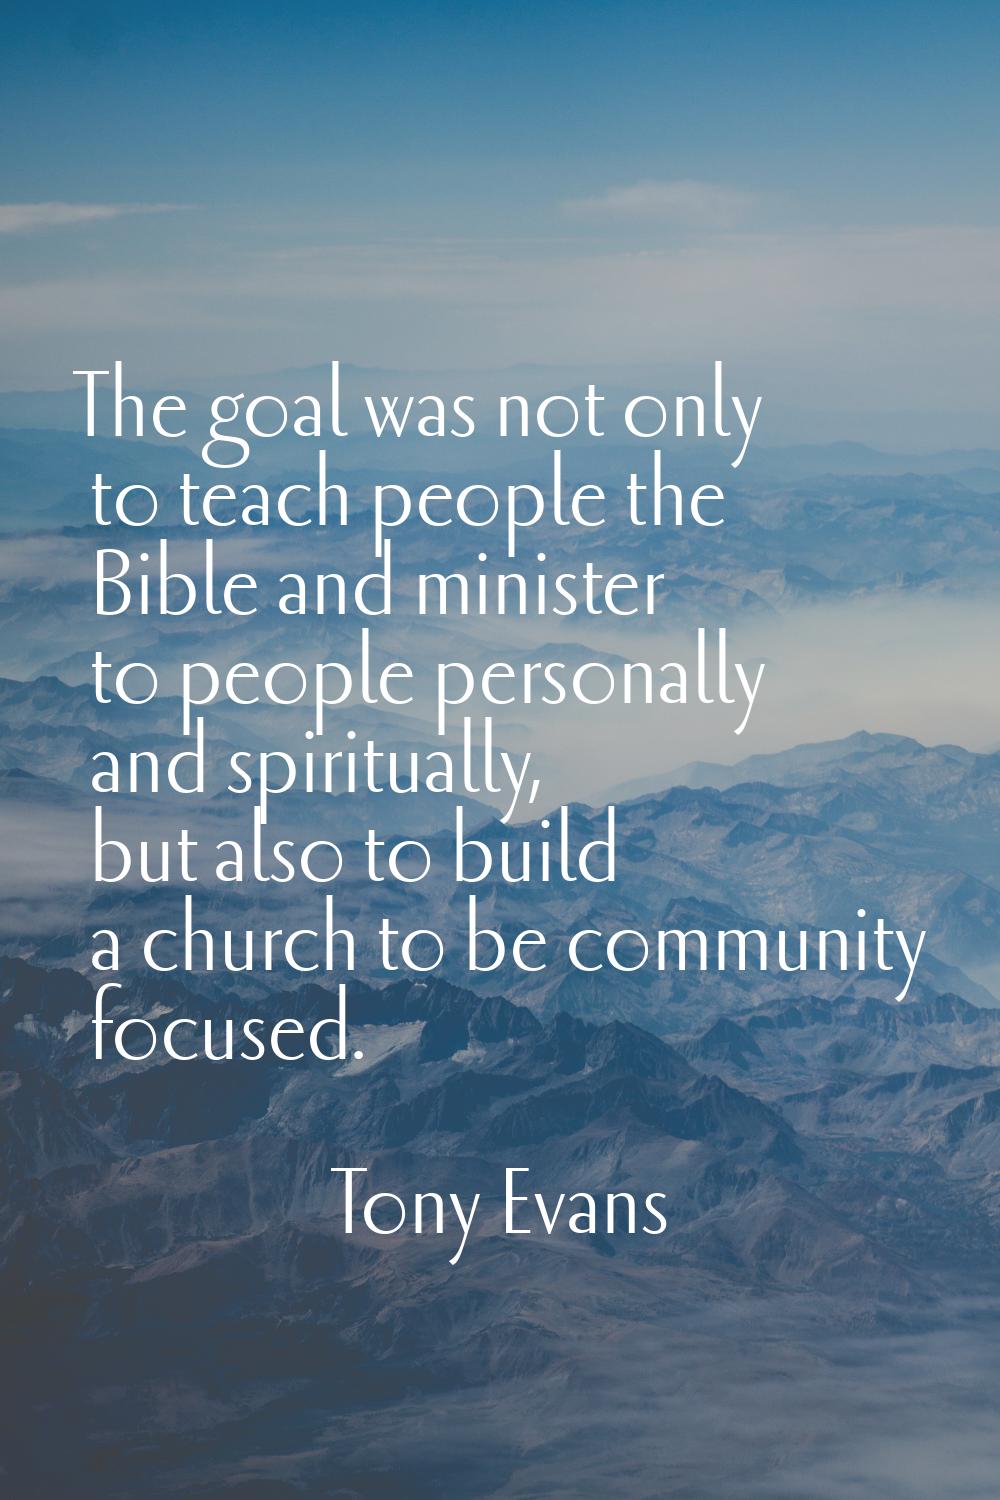 The goal was not only to teach people the Bible and minister to people personally and spiritually, 